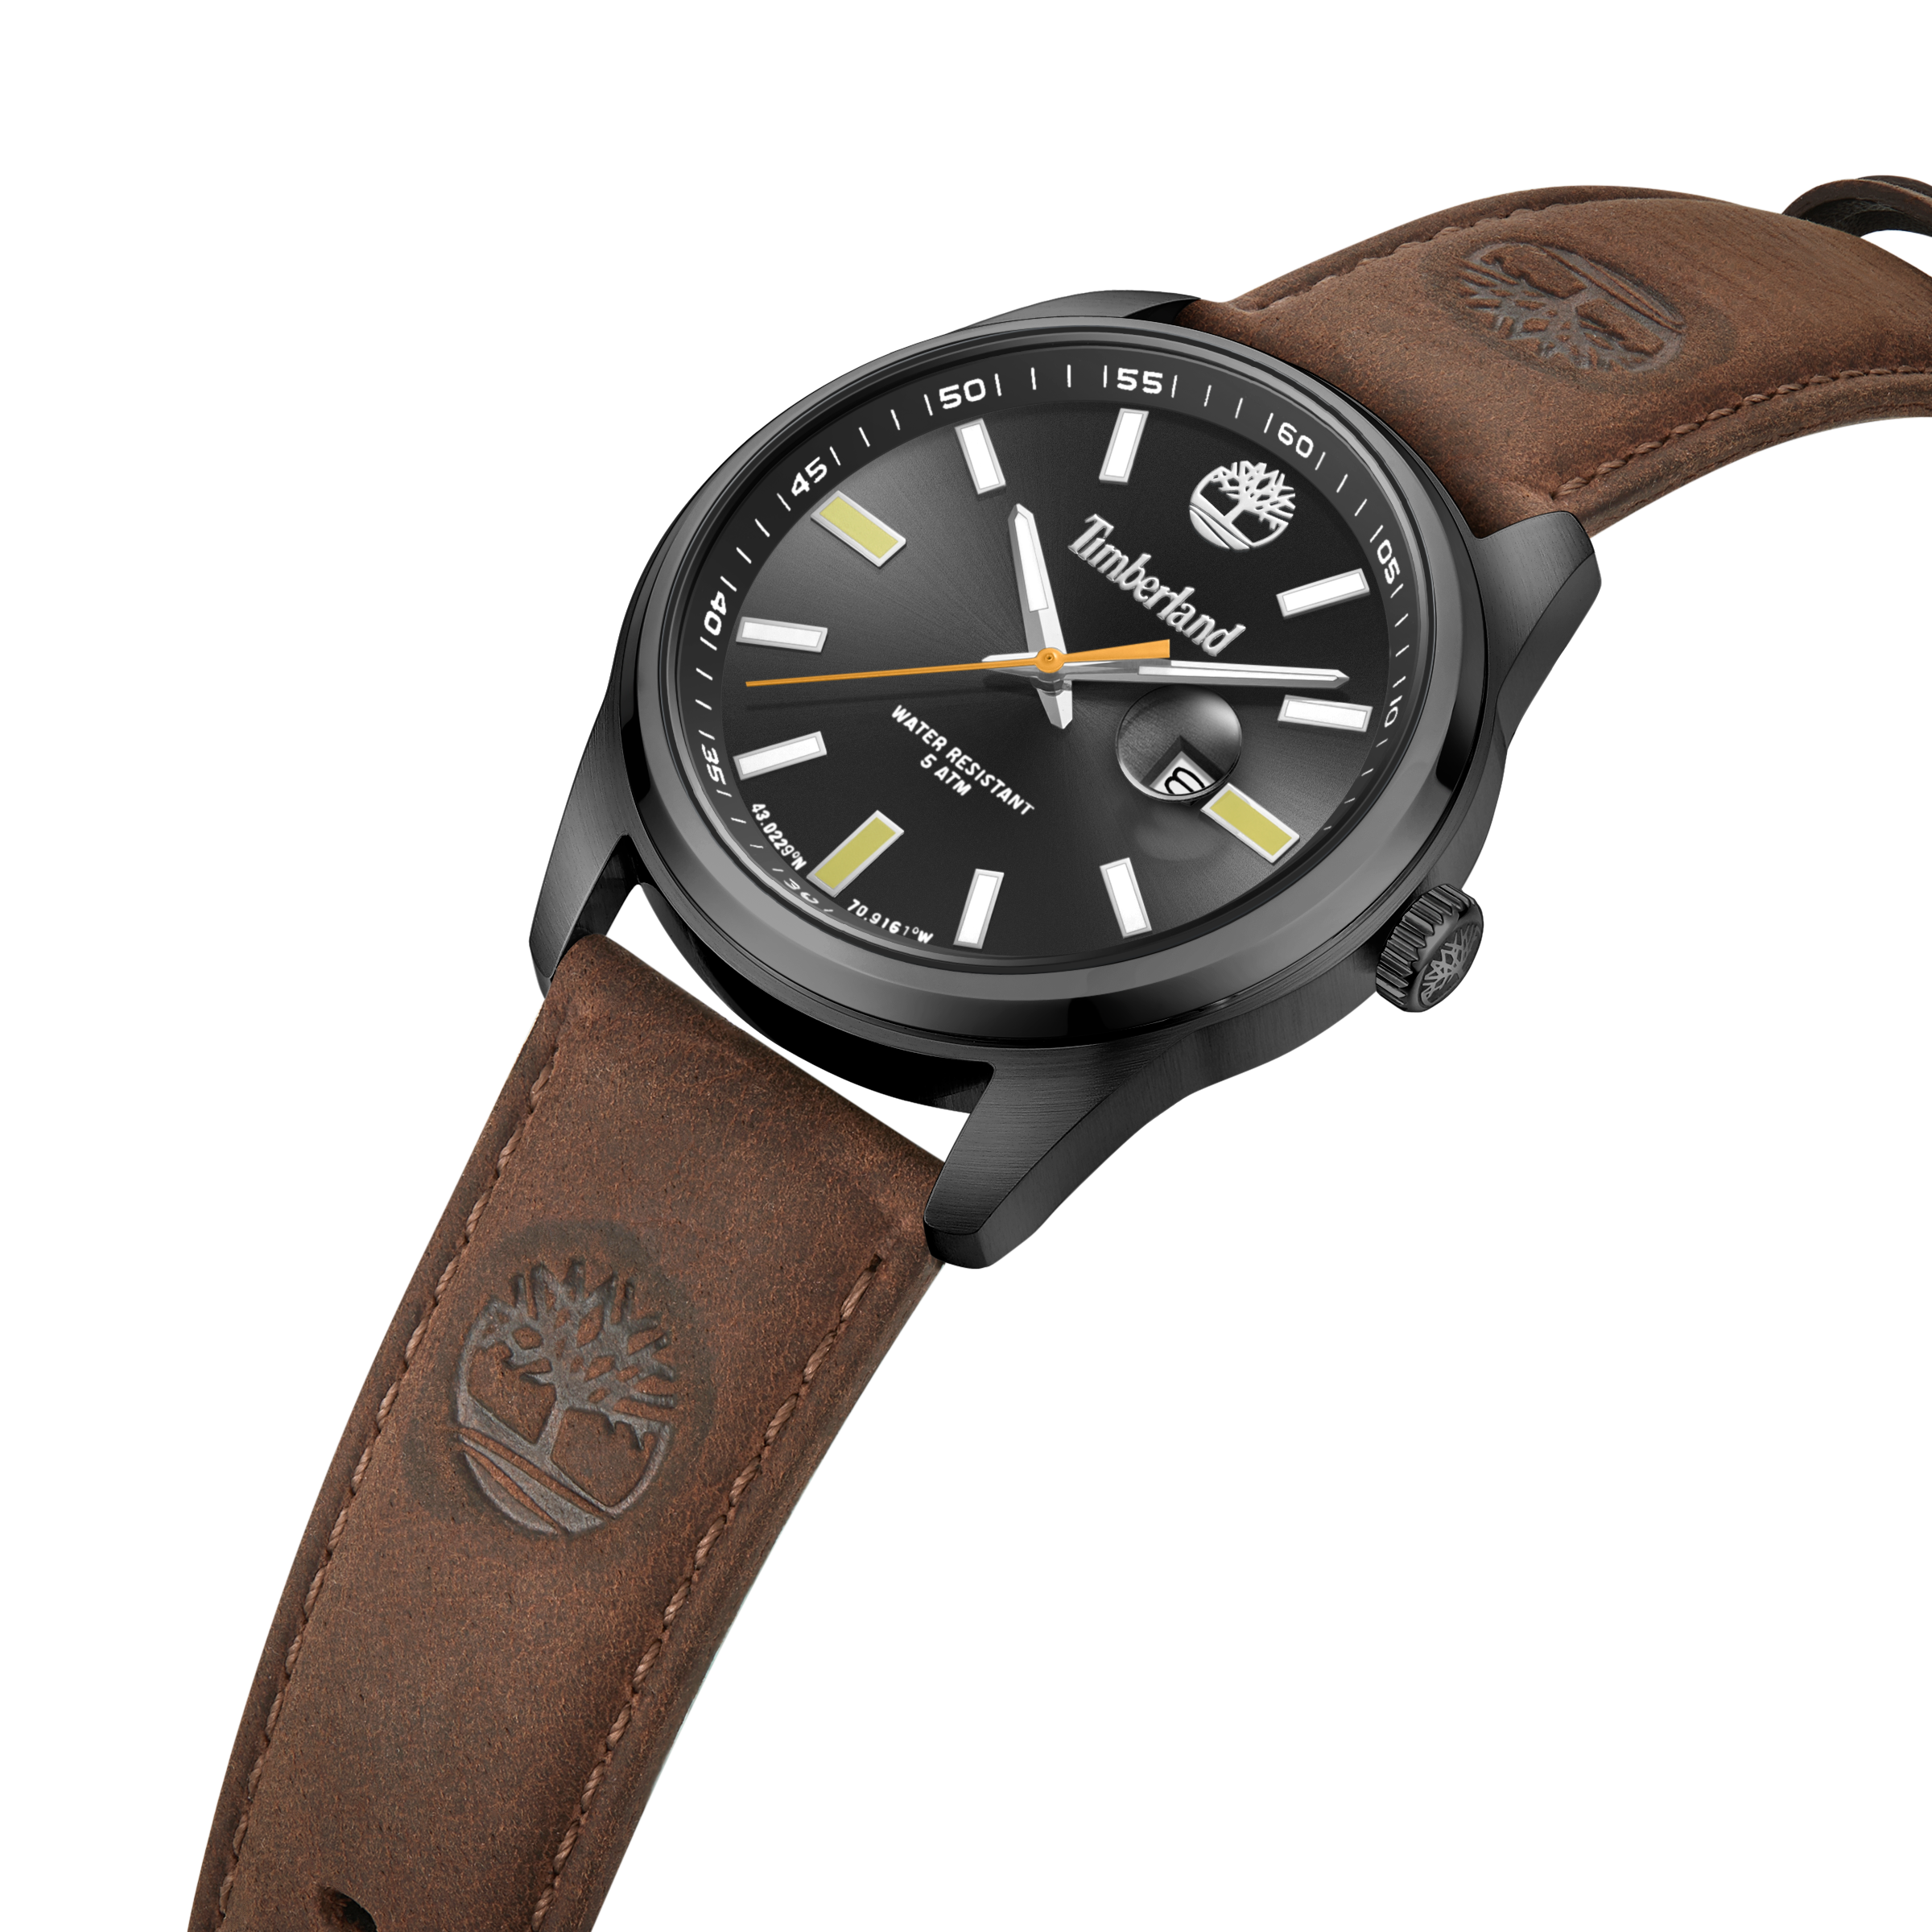 ORFORD – TIMBERLAND, ATAMIAN WATCHES